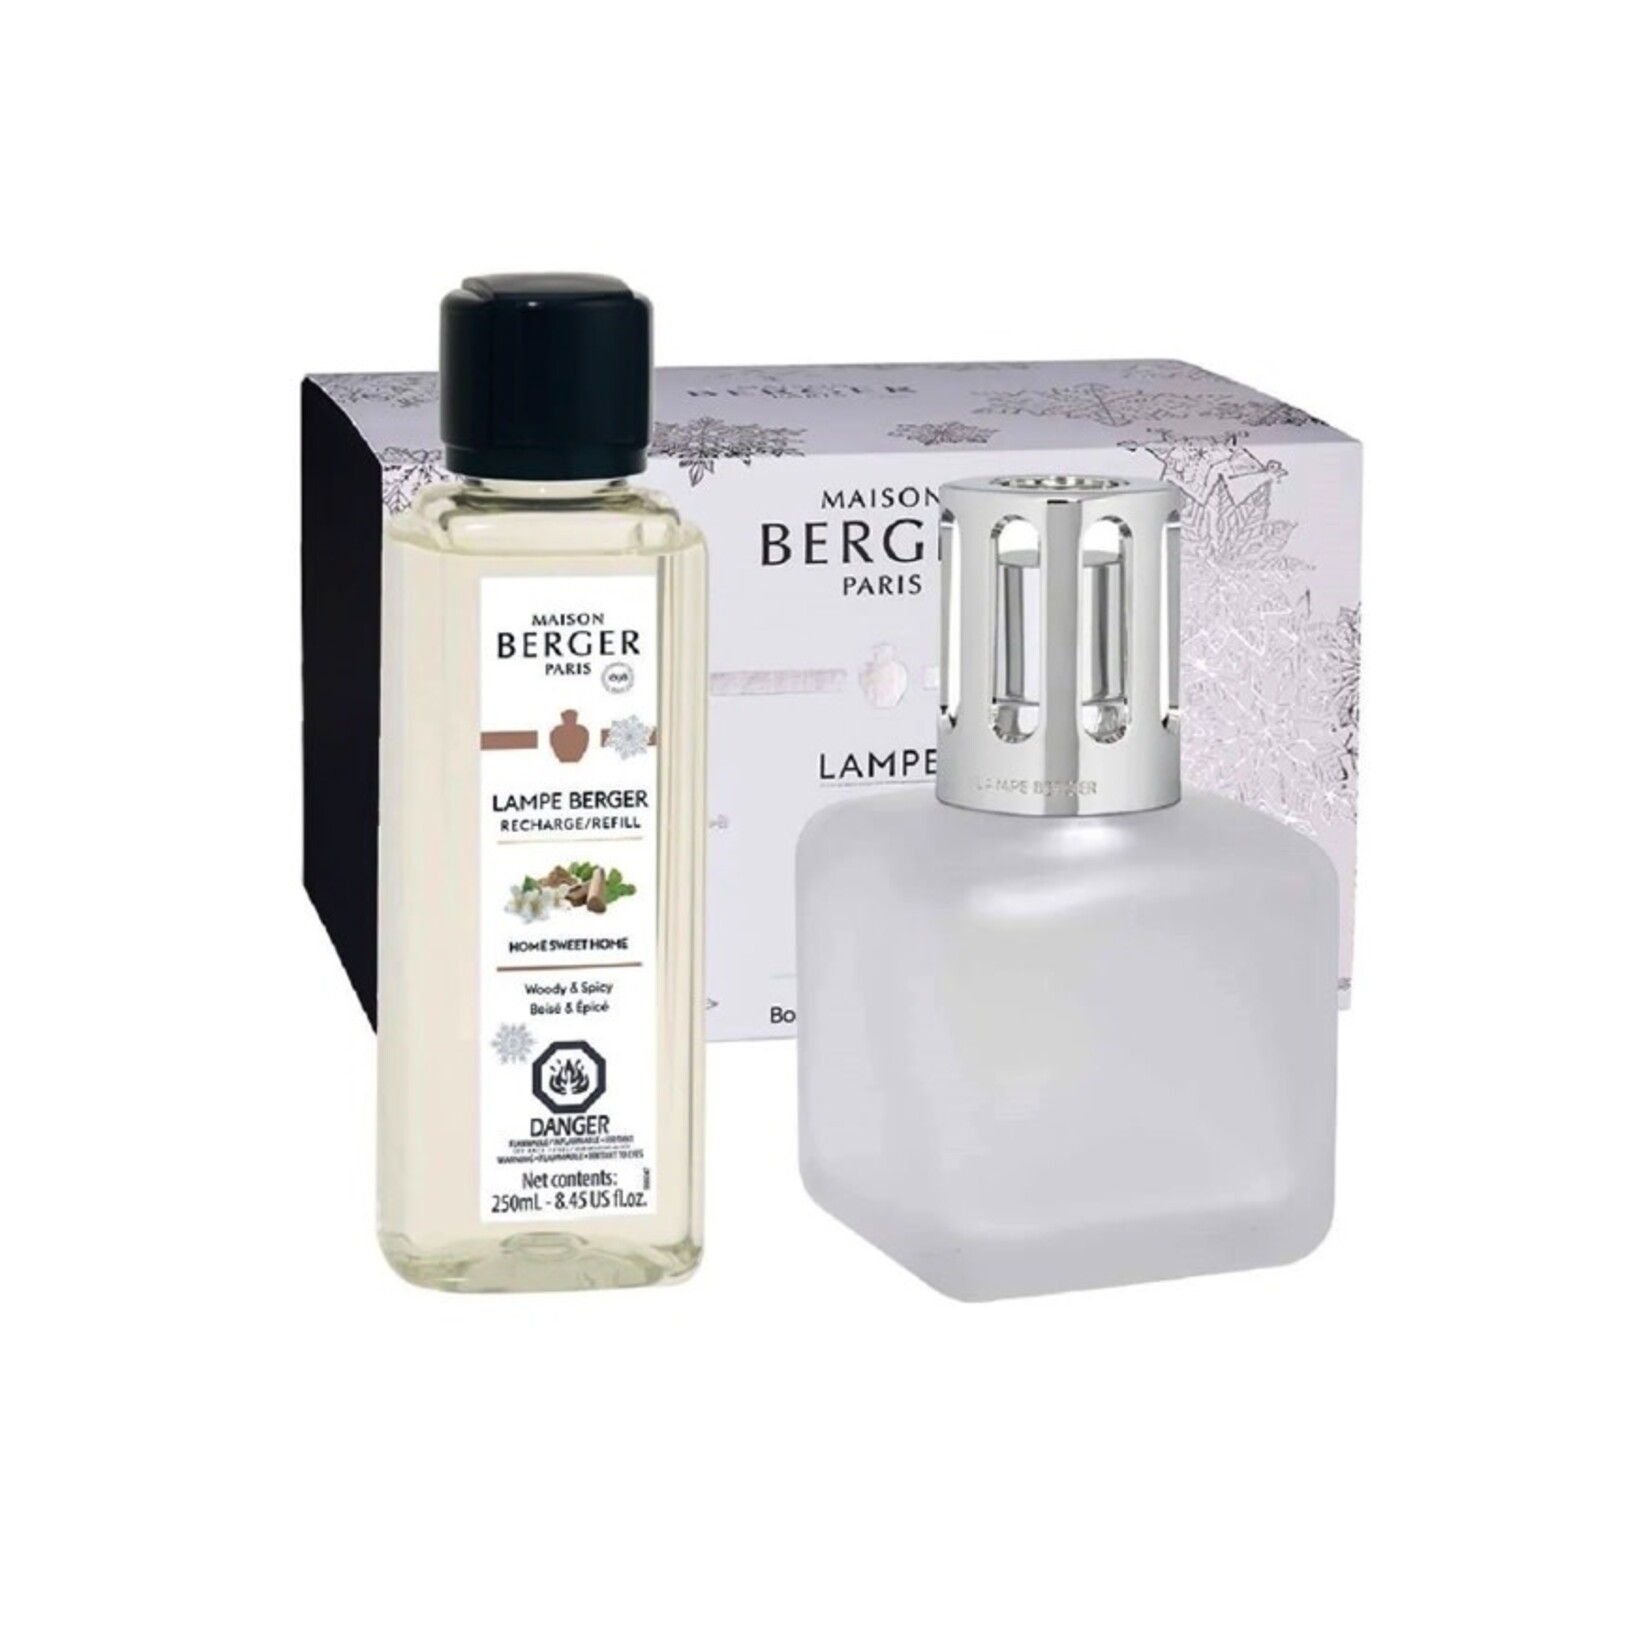 Maison Berger Paris Holiday Lampe Berger Gift Set - Home Sweet Home- Ice Cube